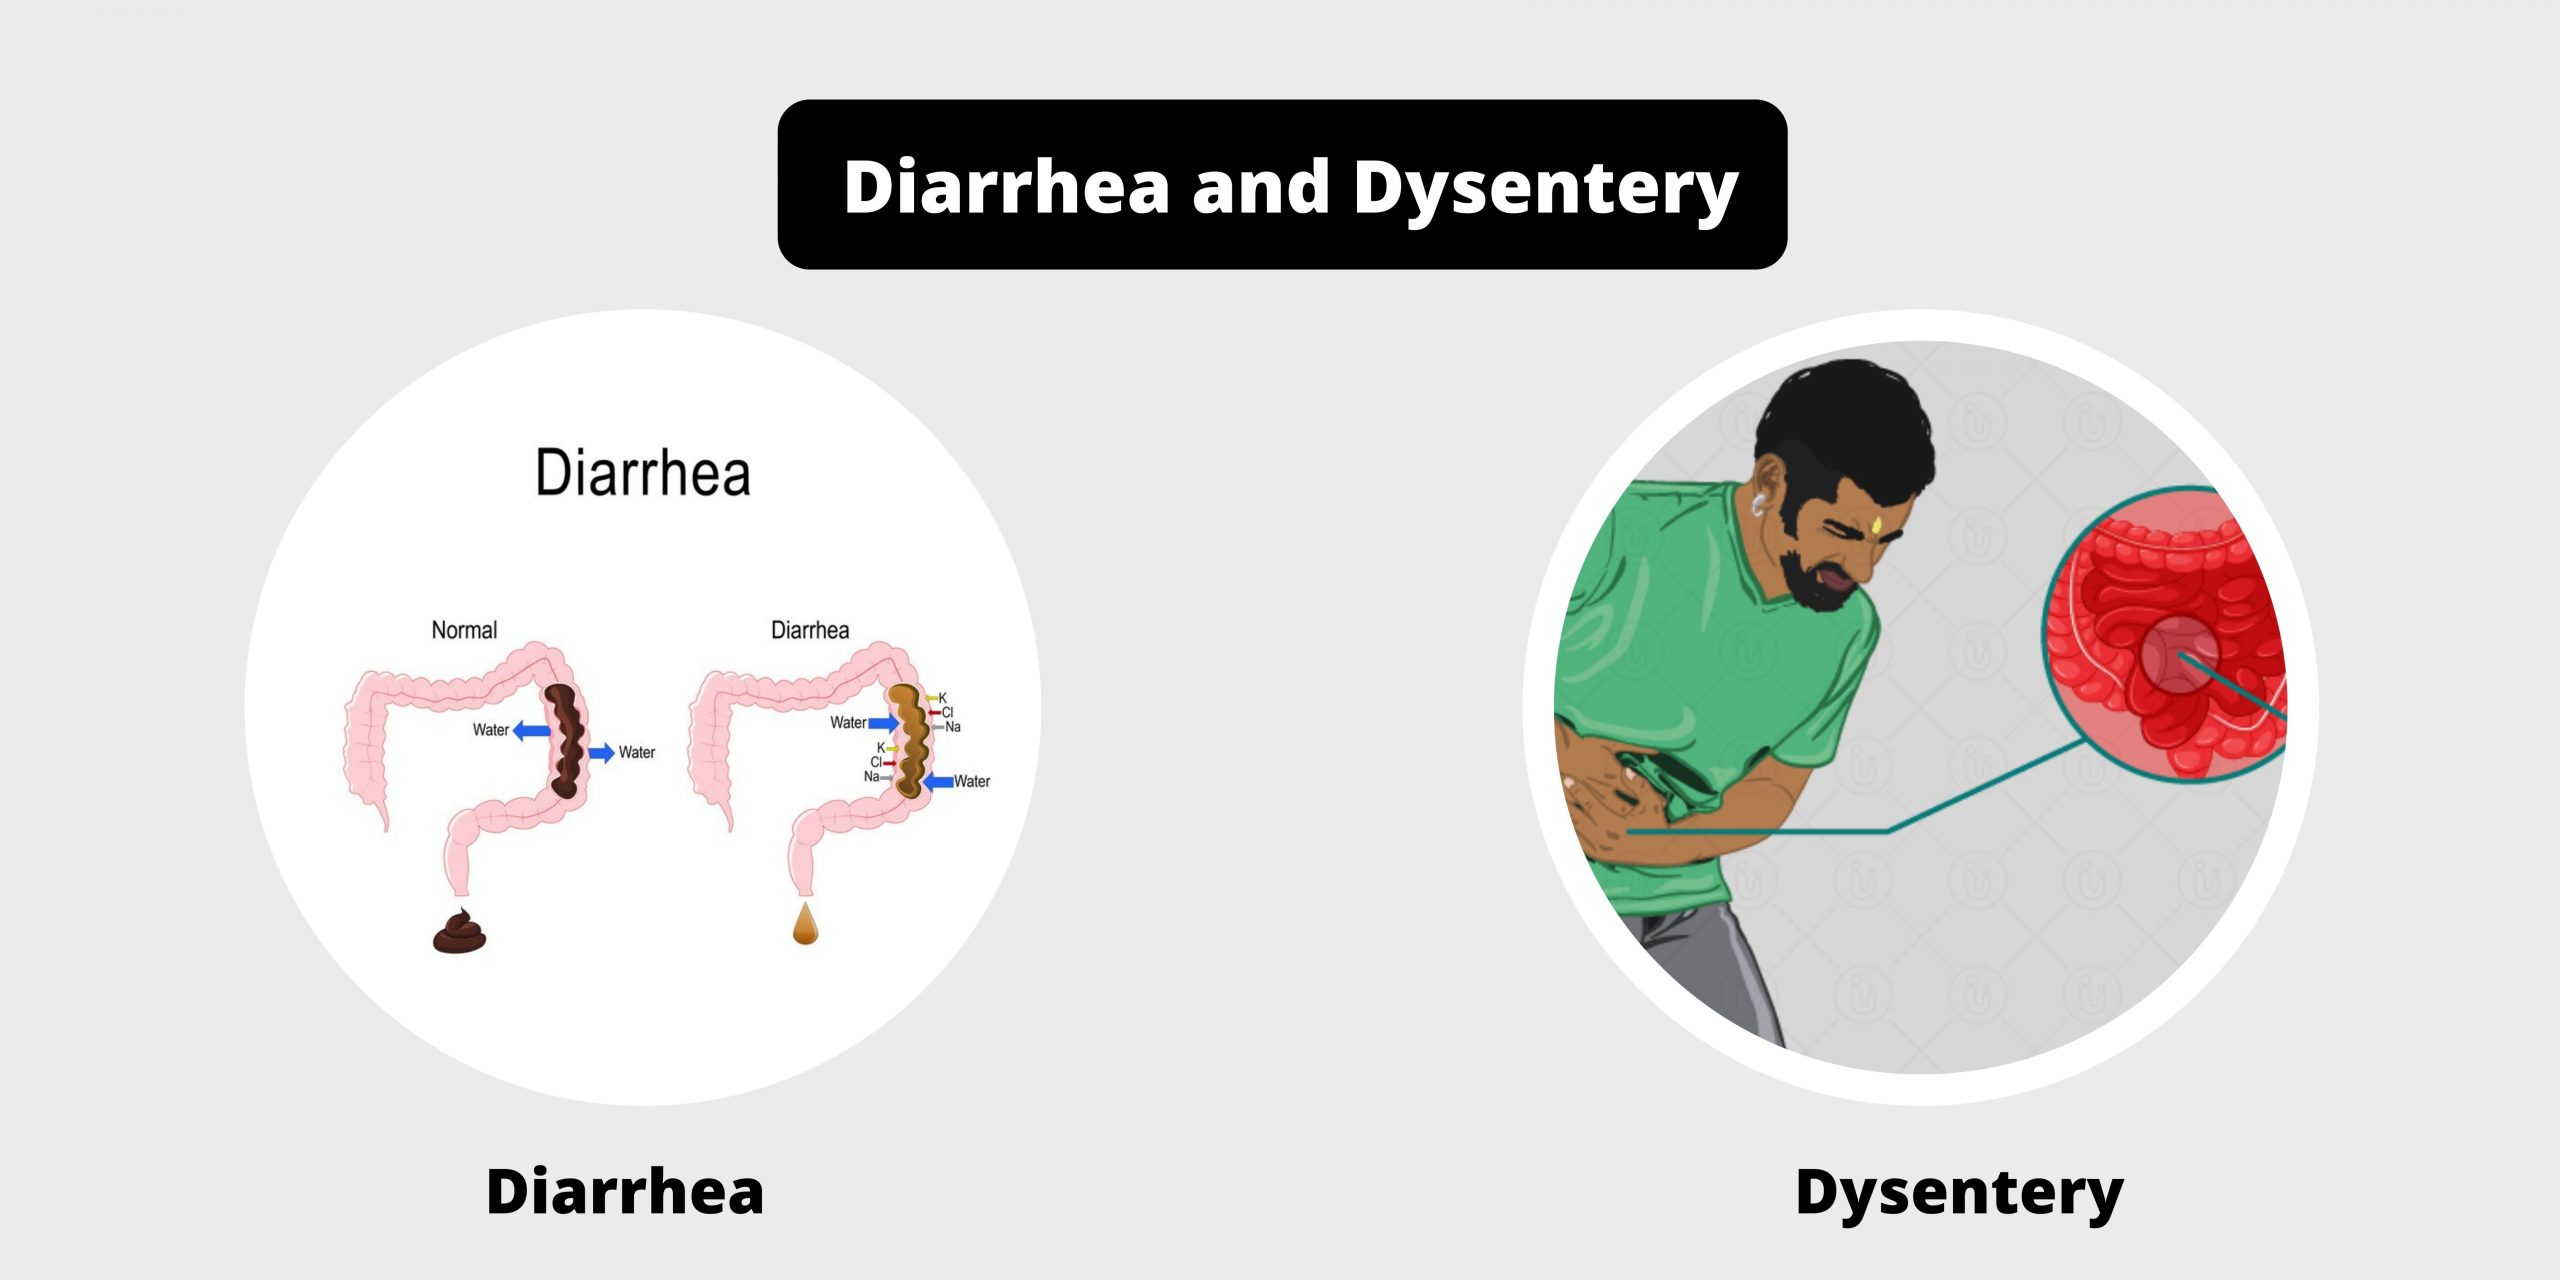 Differences between Diarrhea and Dysentery – Diarrhea vs Dysentery